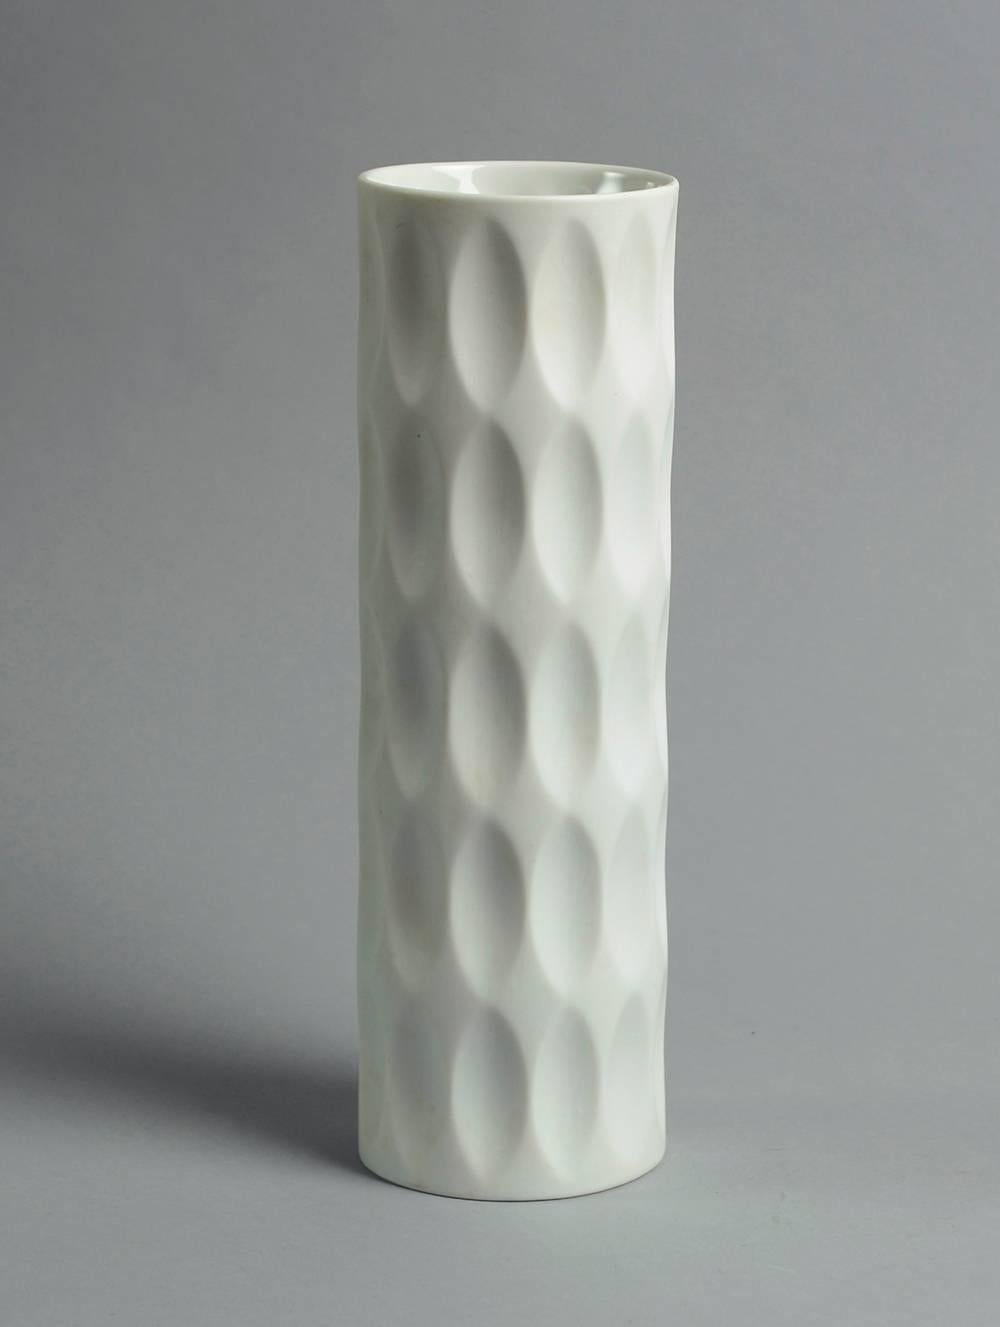 Three Vases with Matte White Glaze by Heutschenreuther In Excellent Condition For Sale In New York, NY